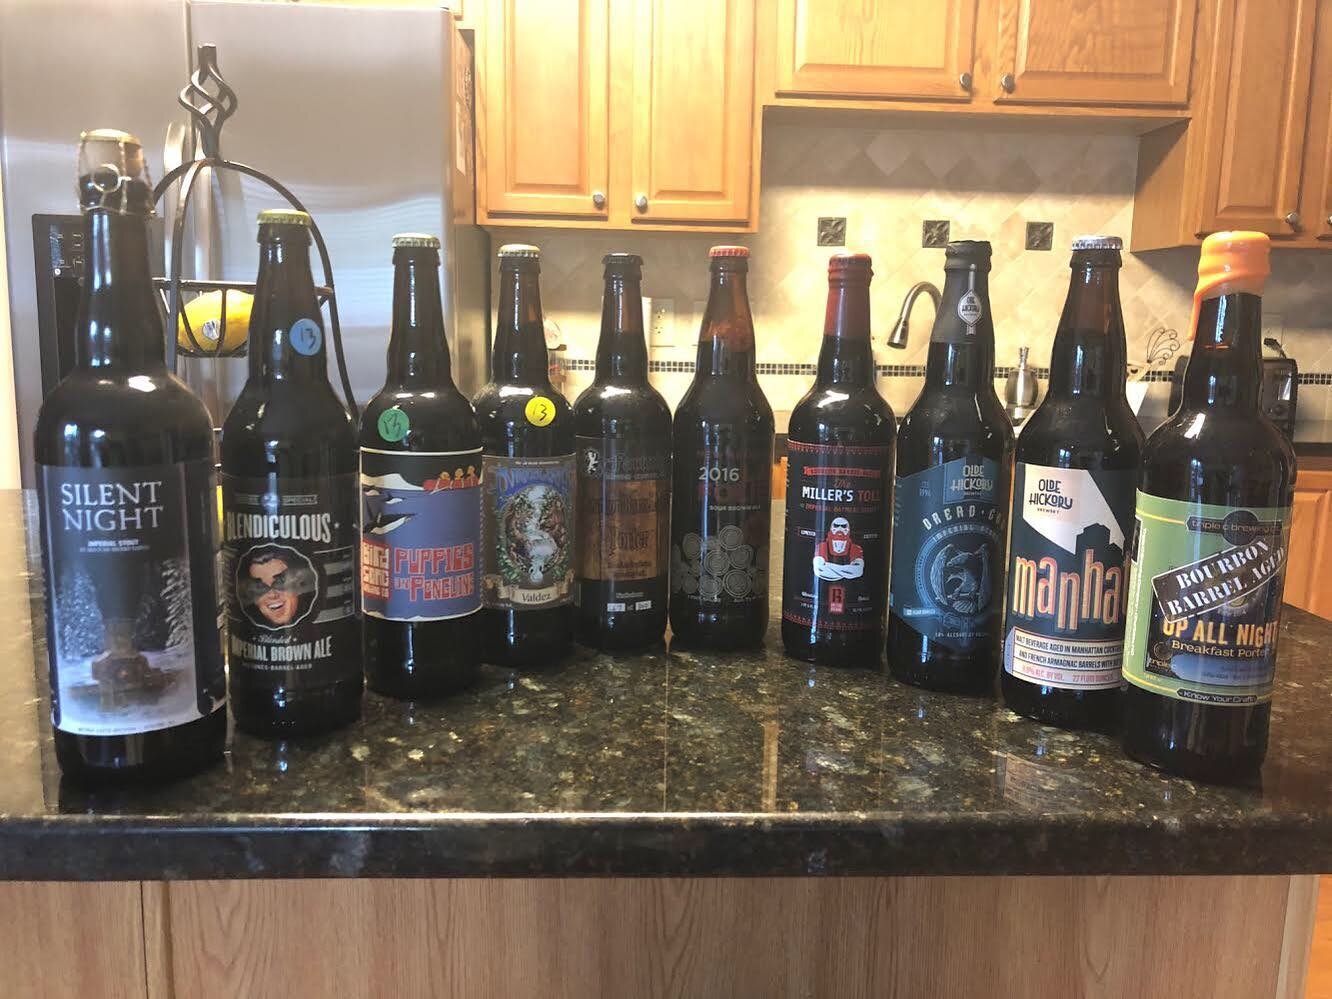 THANK YOU to the NC Beer Guys for their contribution of these awesome beers for our GIVE and GET Donation Drive! When you make a donation of more than $5, you automatically get entered into this year&rsquo;s drawing of prizes! 

Enter for some incred